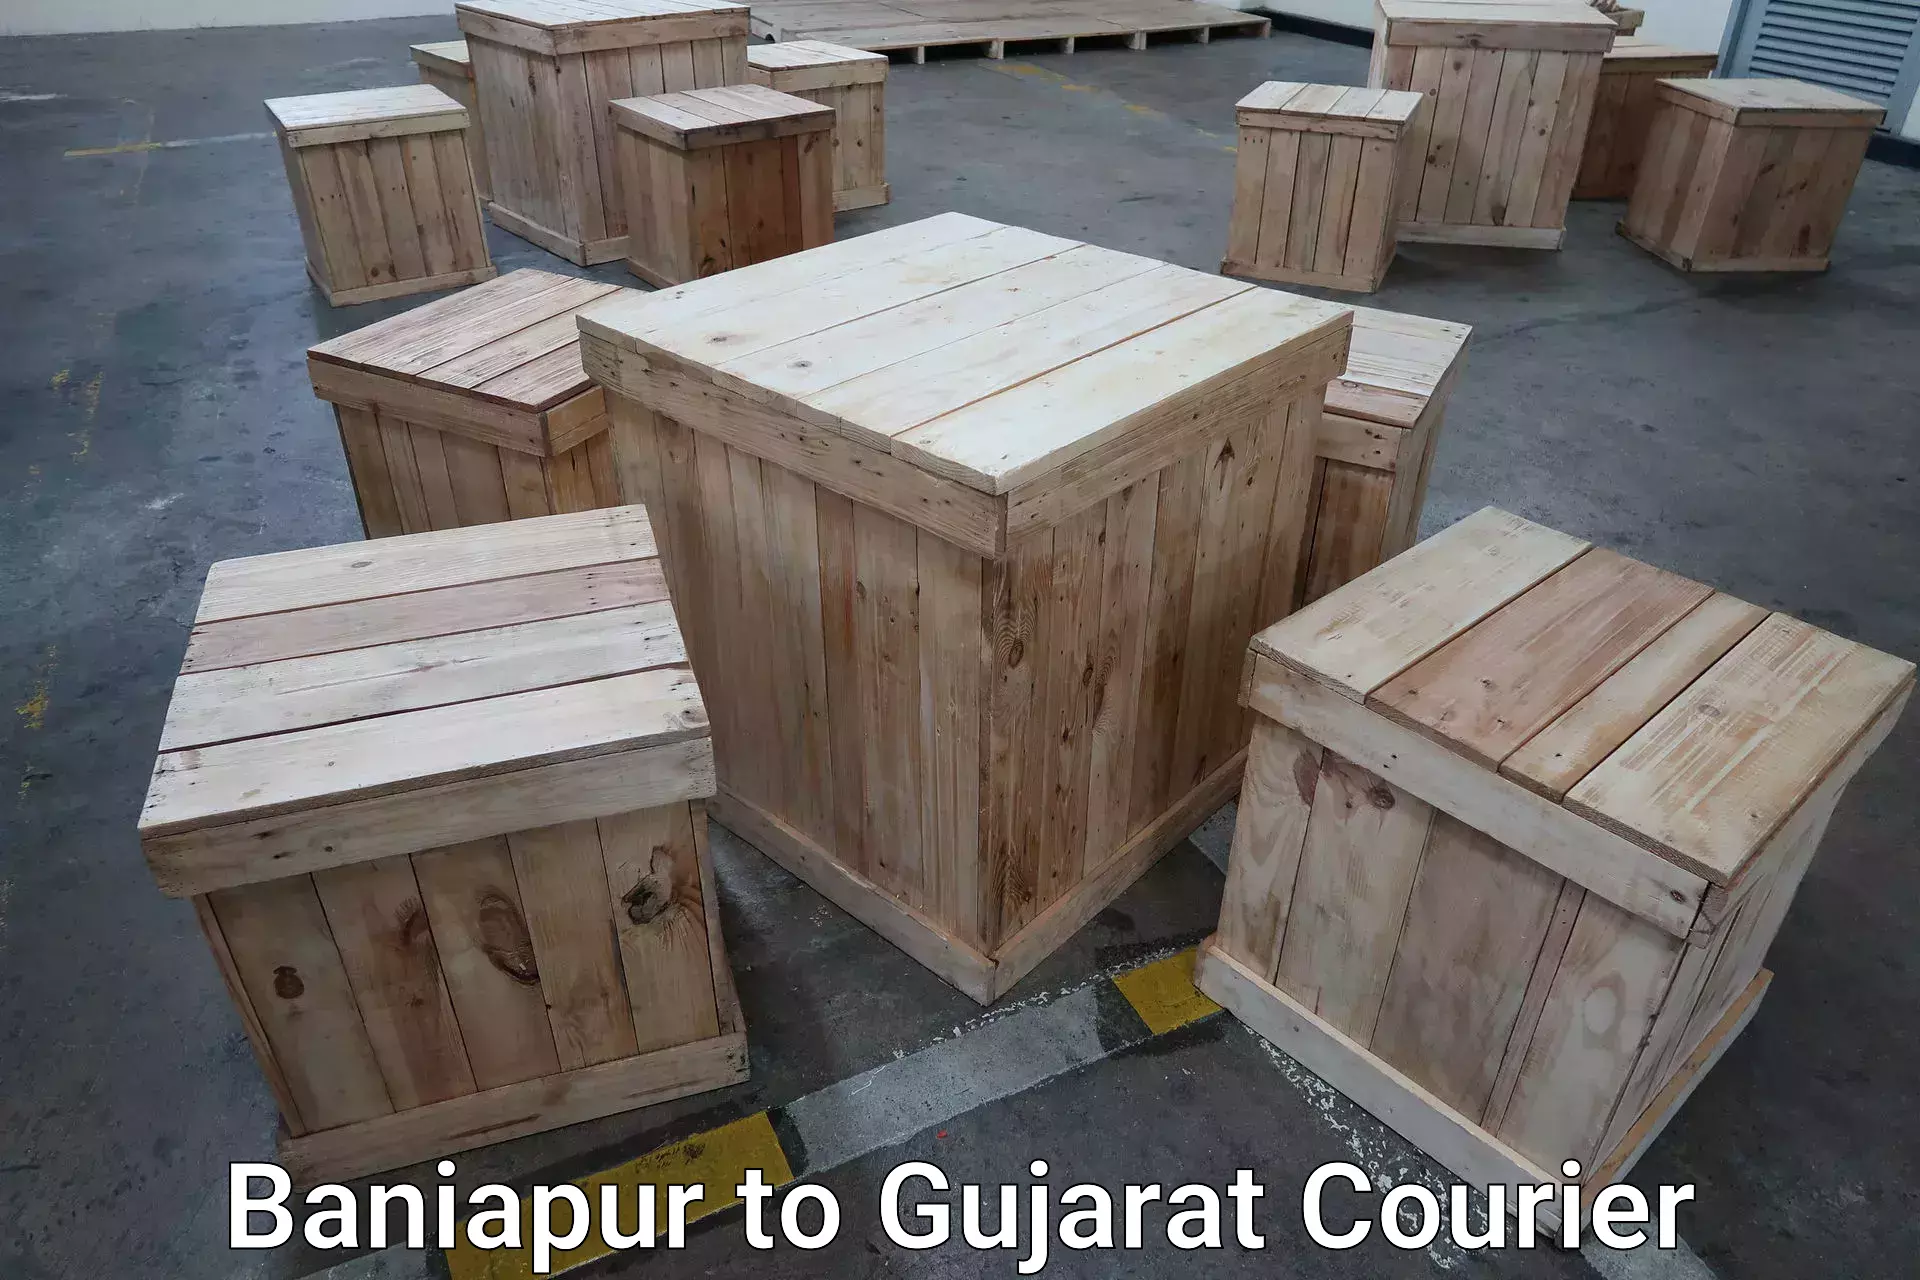 Luggage shipment specialists Baniapur to Bharuch